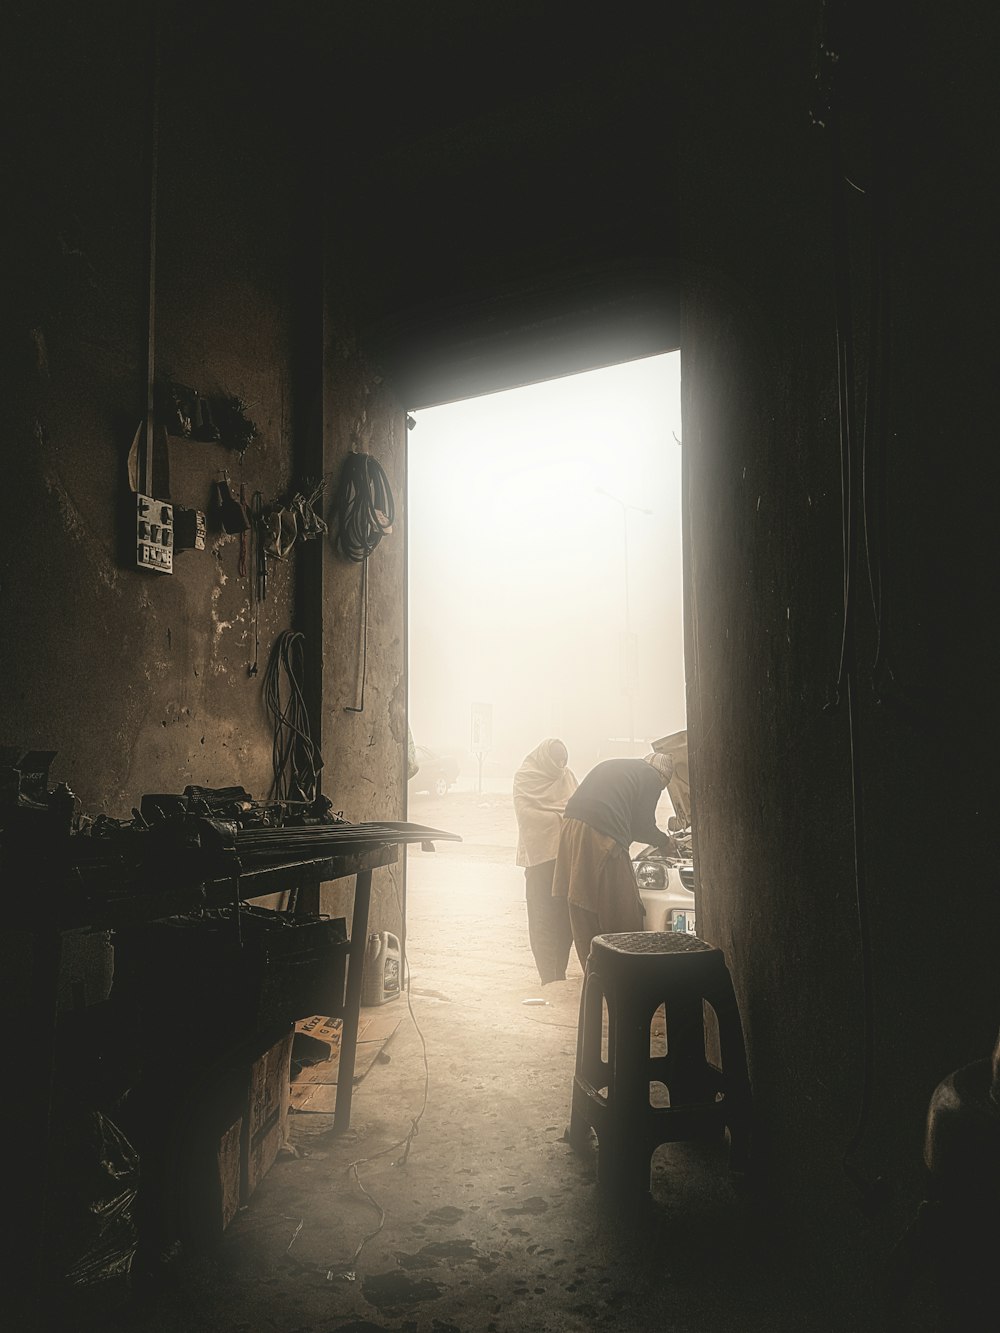 a dark room with a person standing in the doorway